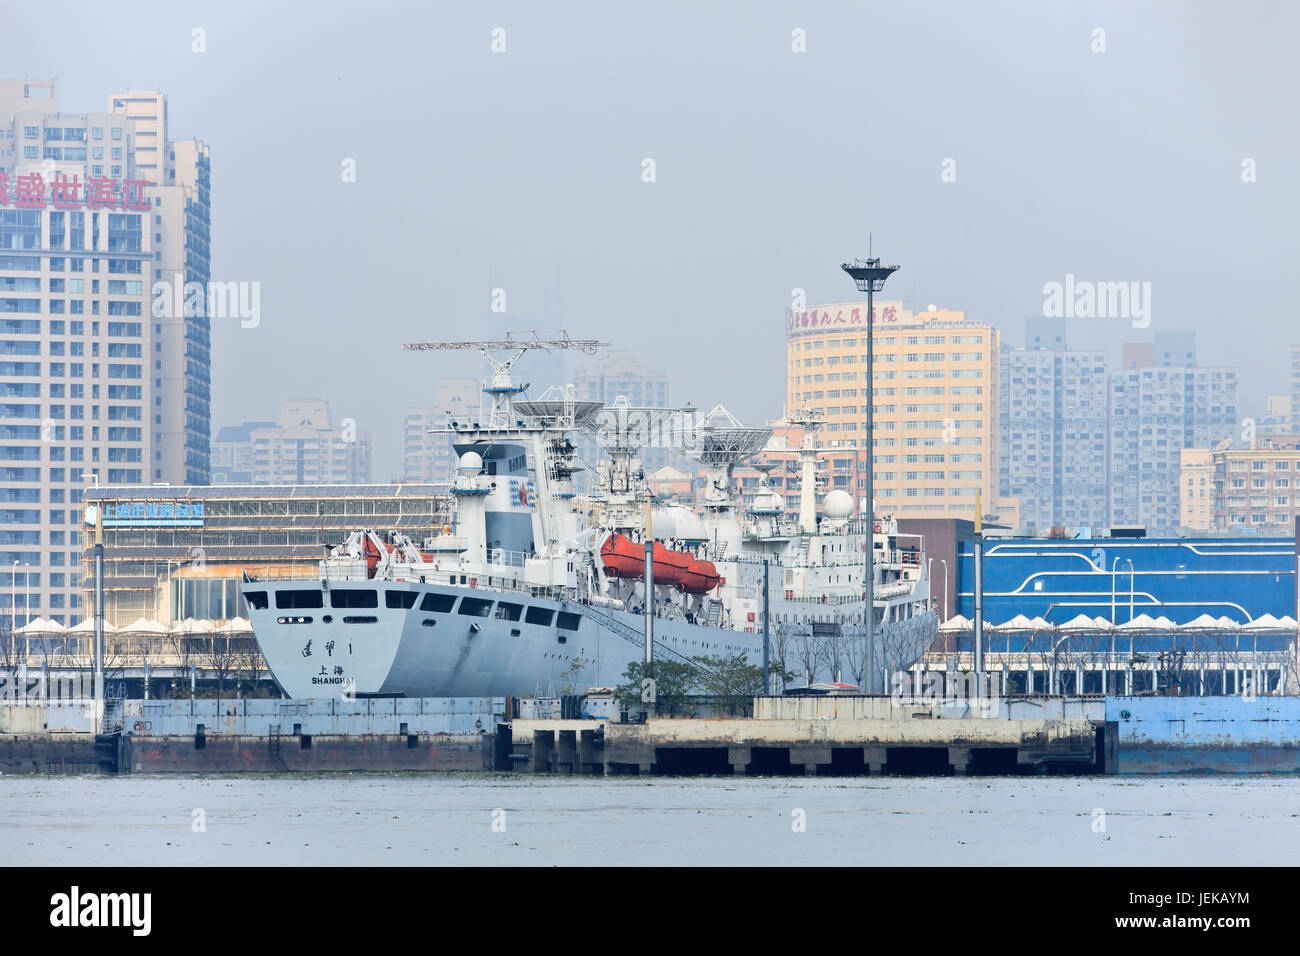 Chinese satellite tracking vessel Liao Wang, laden with satellites and scanners, crewed by scientists  to contribute to China’s space engineering. Stock Photo